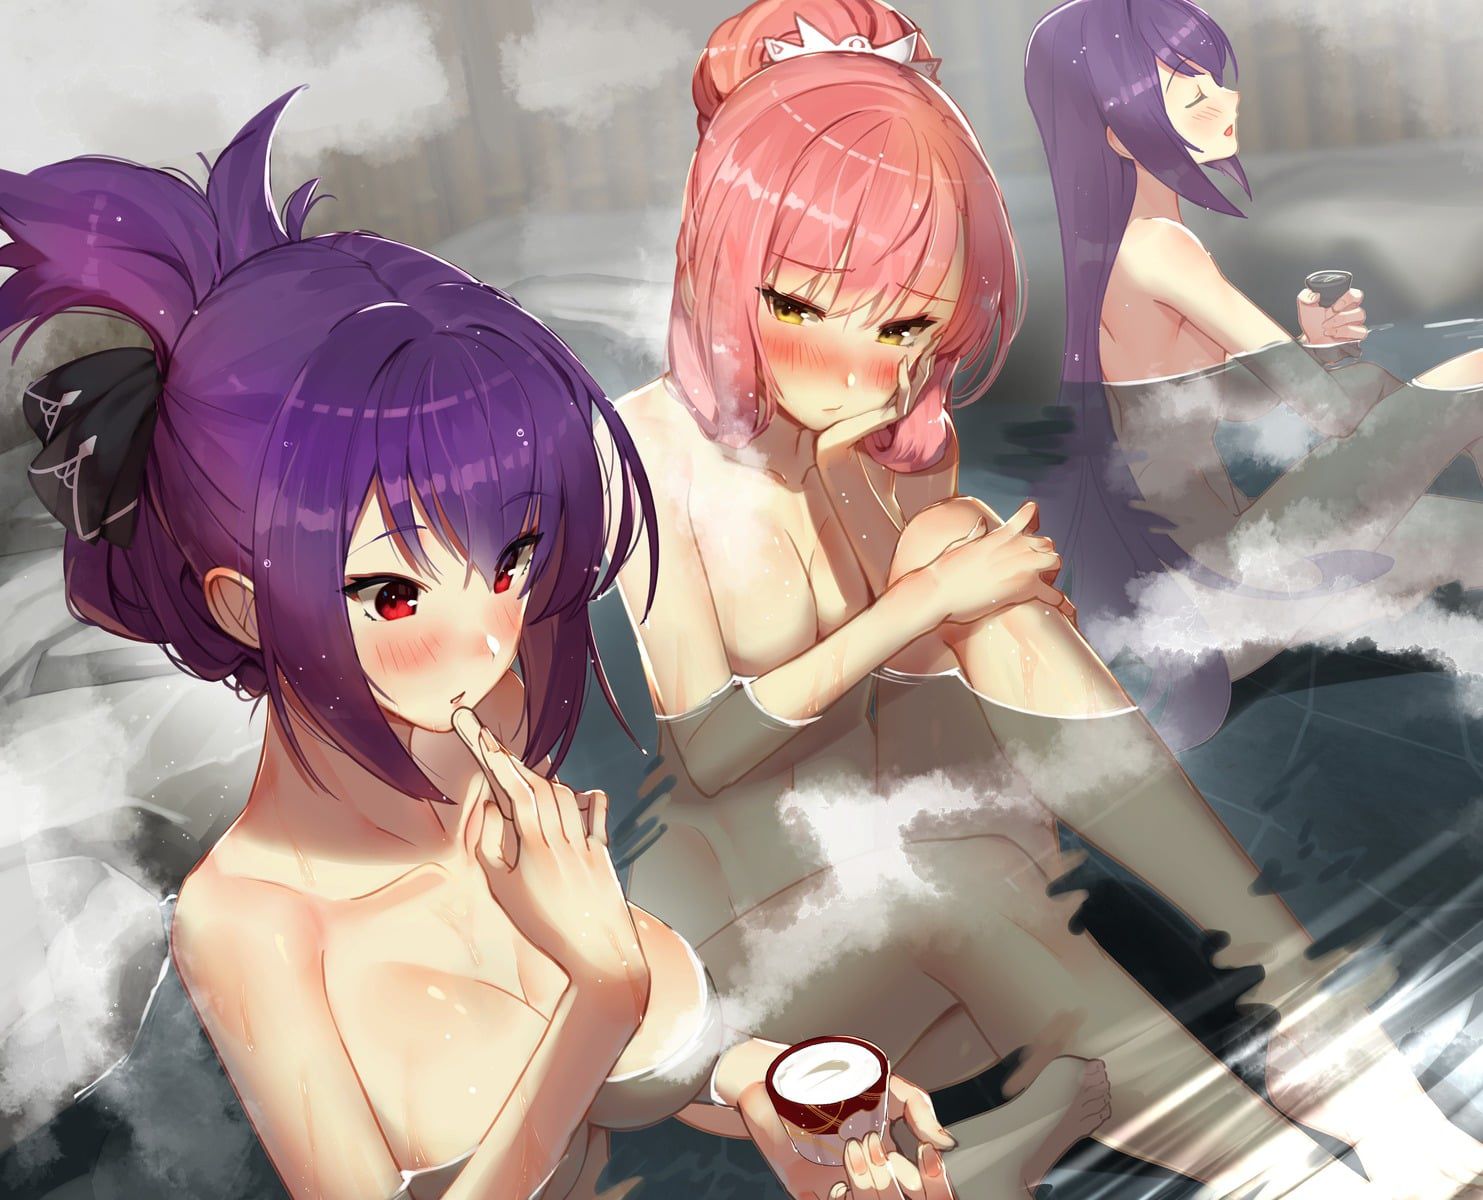 Let's gaze at the bath scene of a defenseless girl during relaxation time! 41